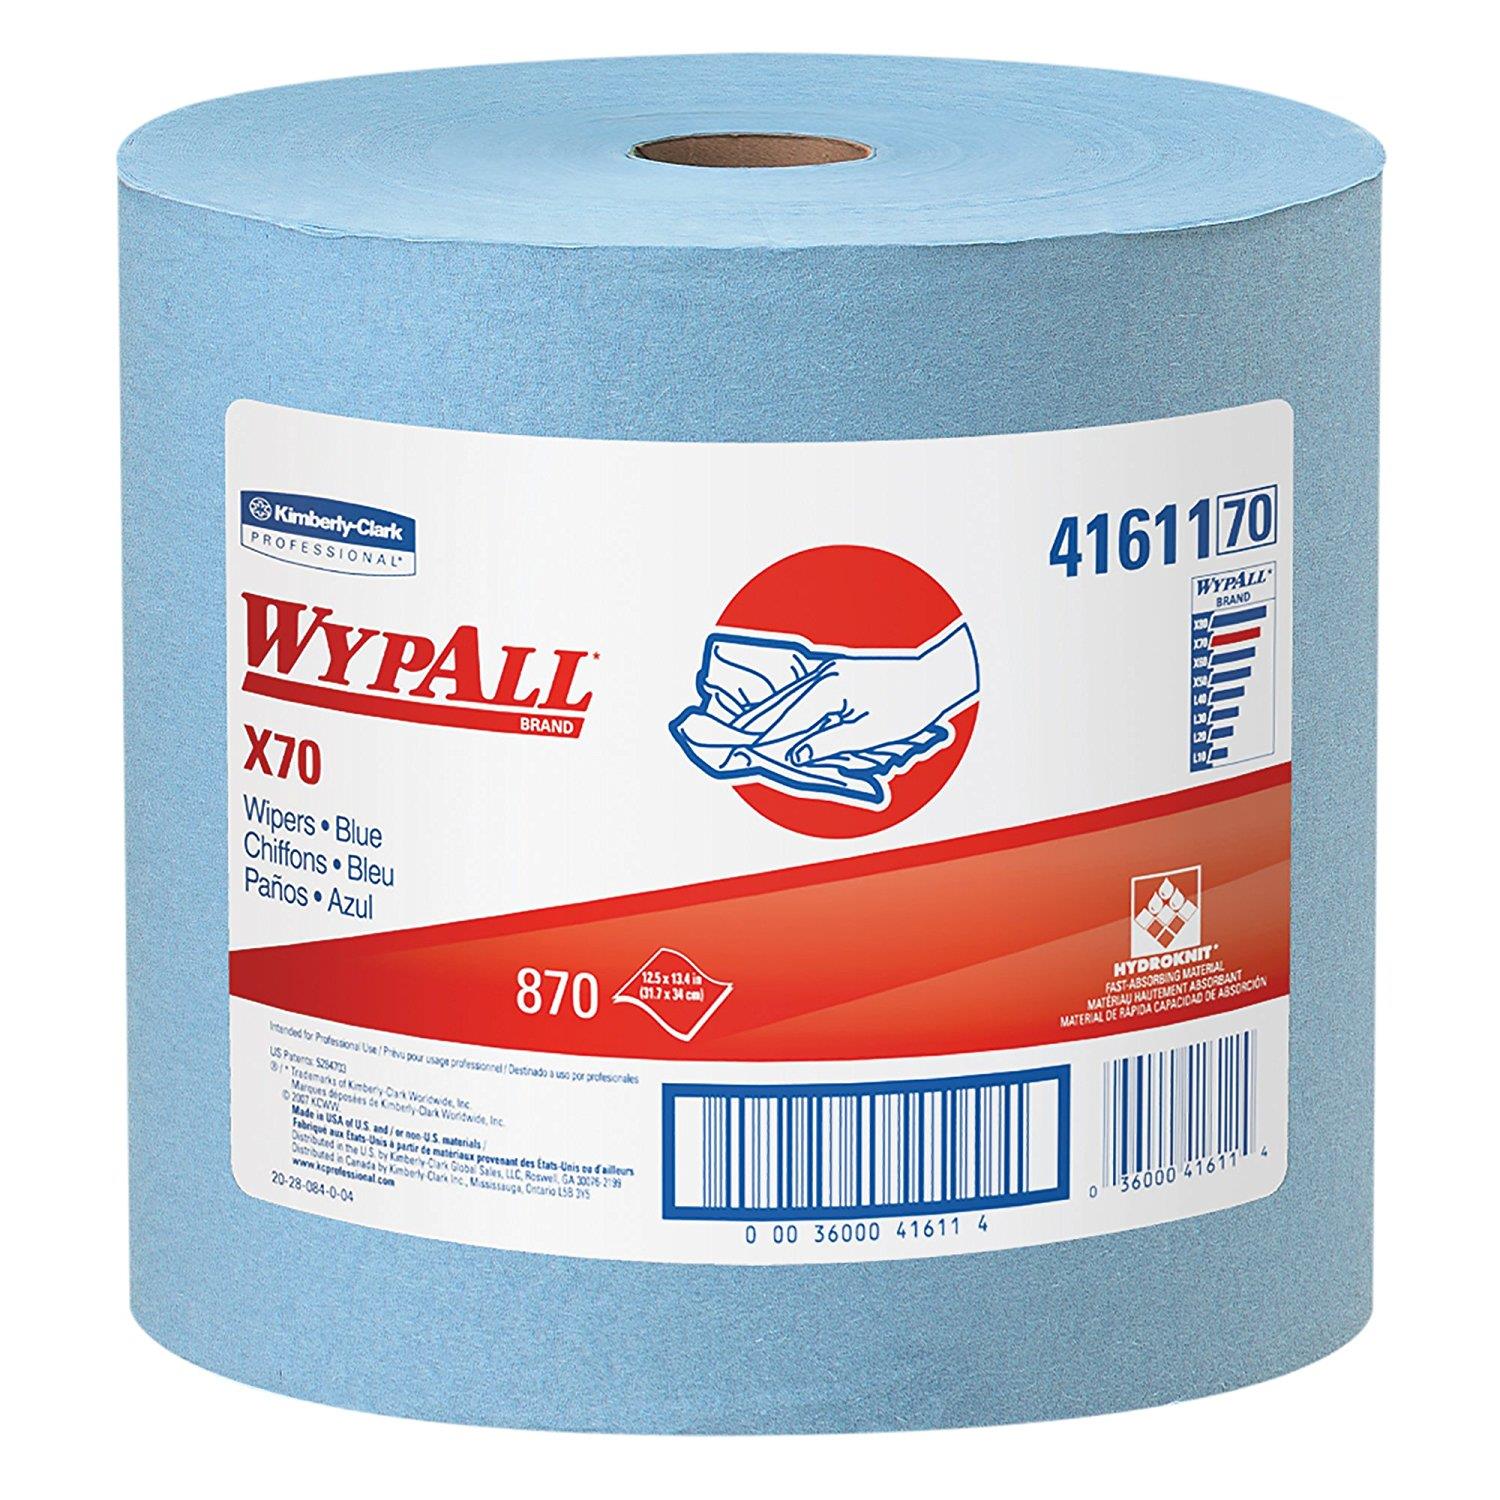 WYPALL X70 JUMBO ROLL BLUE 870 WIPERS - Tagged Gloves